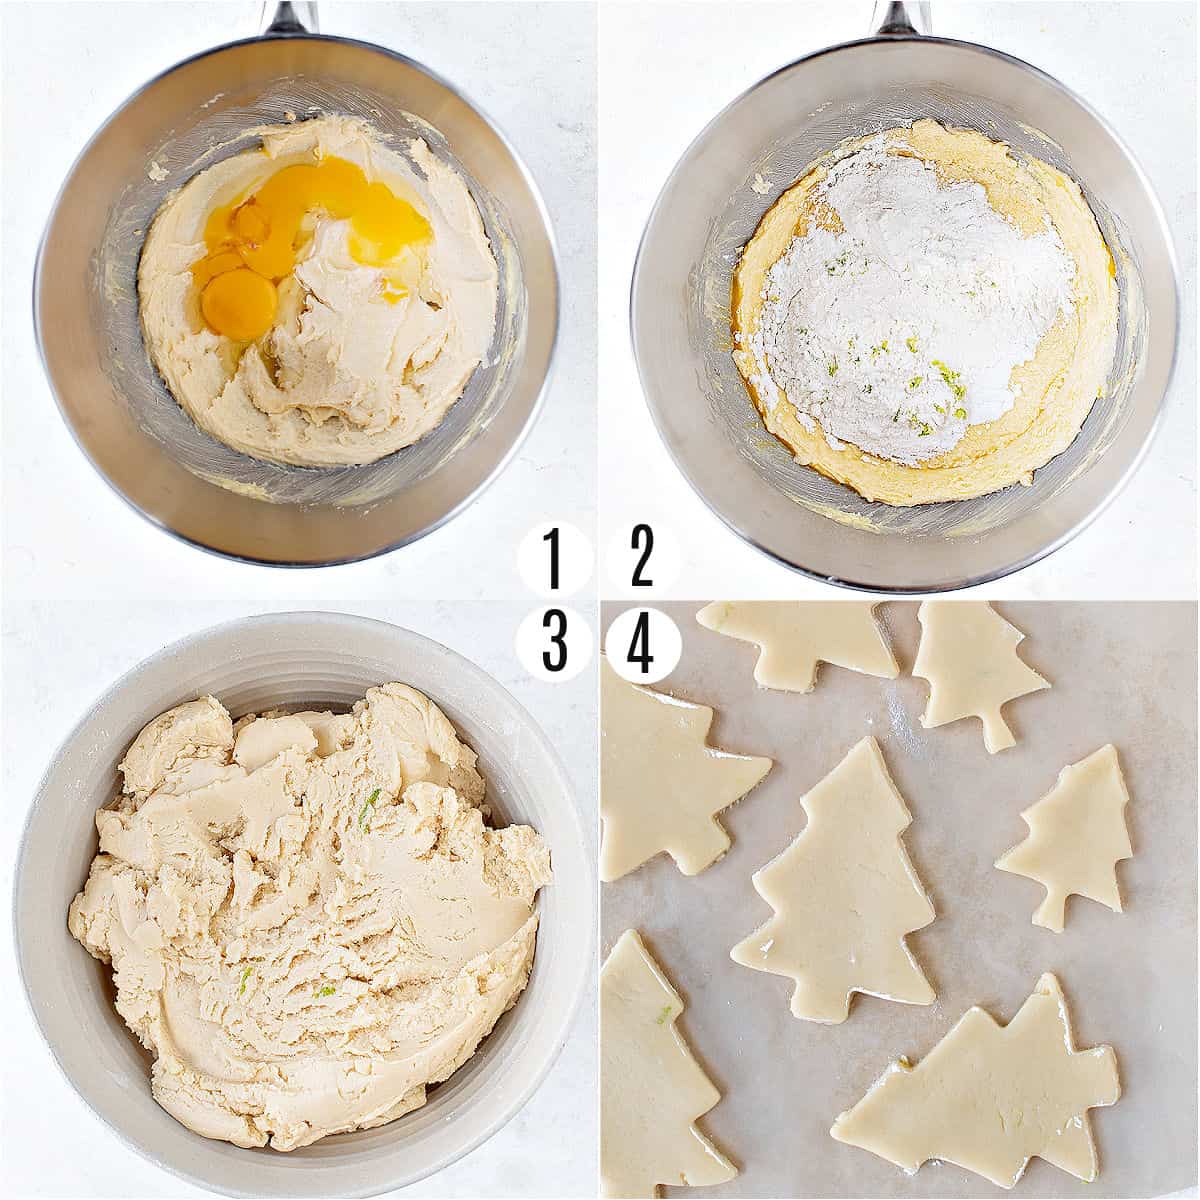 Step by step photos showing how to make sugar cookies.